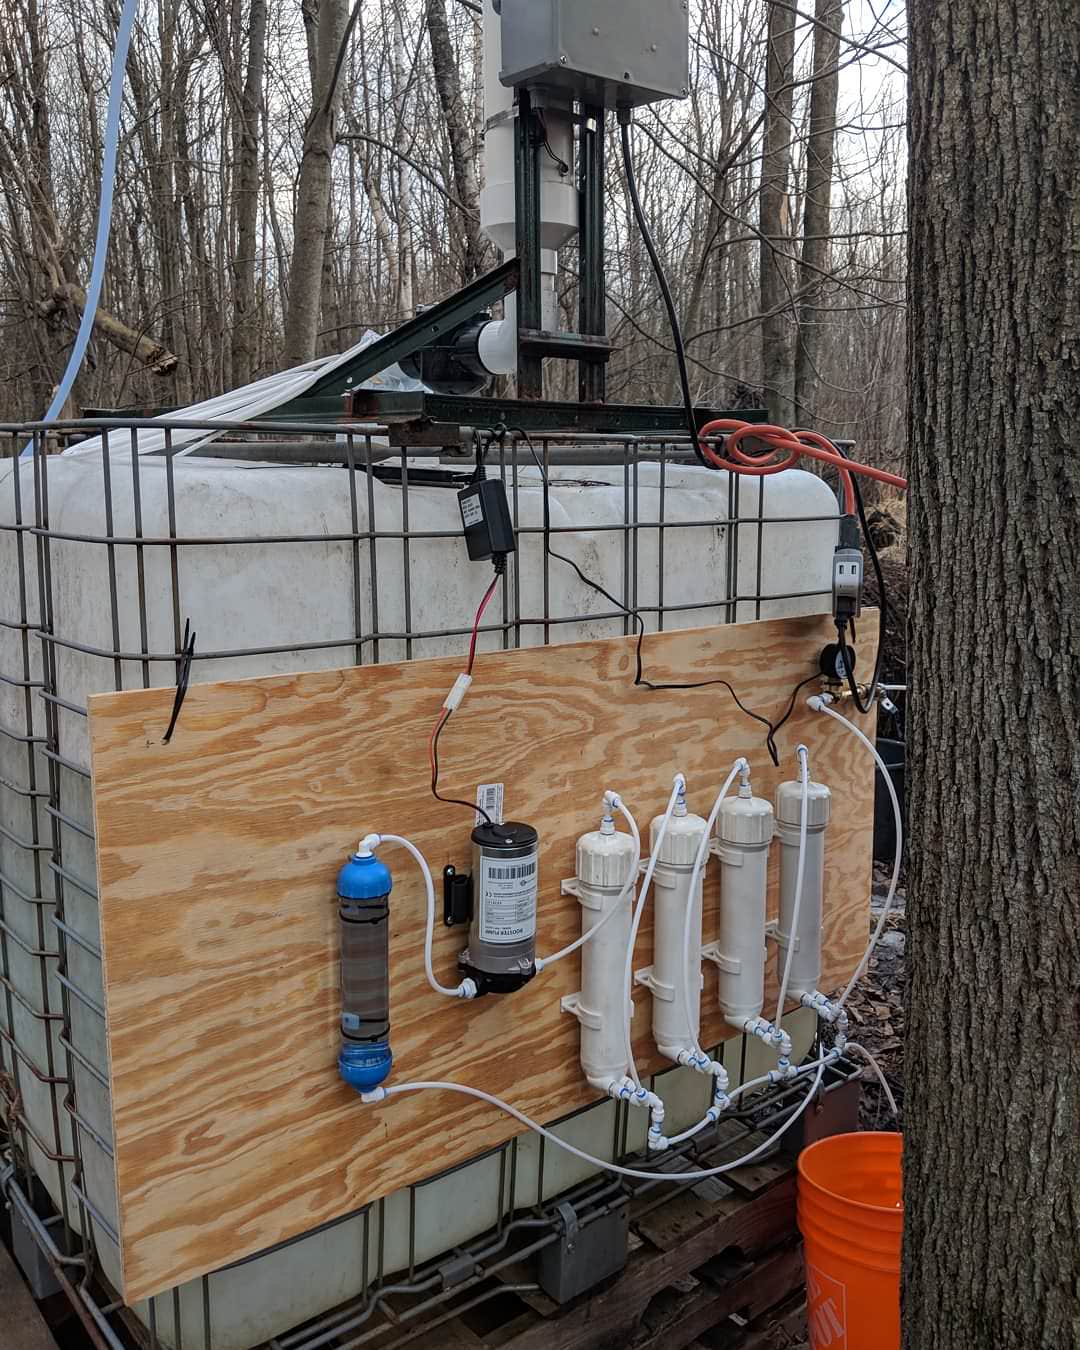 Tradition of Tapping Maple Trees Given an Epic DIY Upgrade